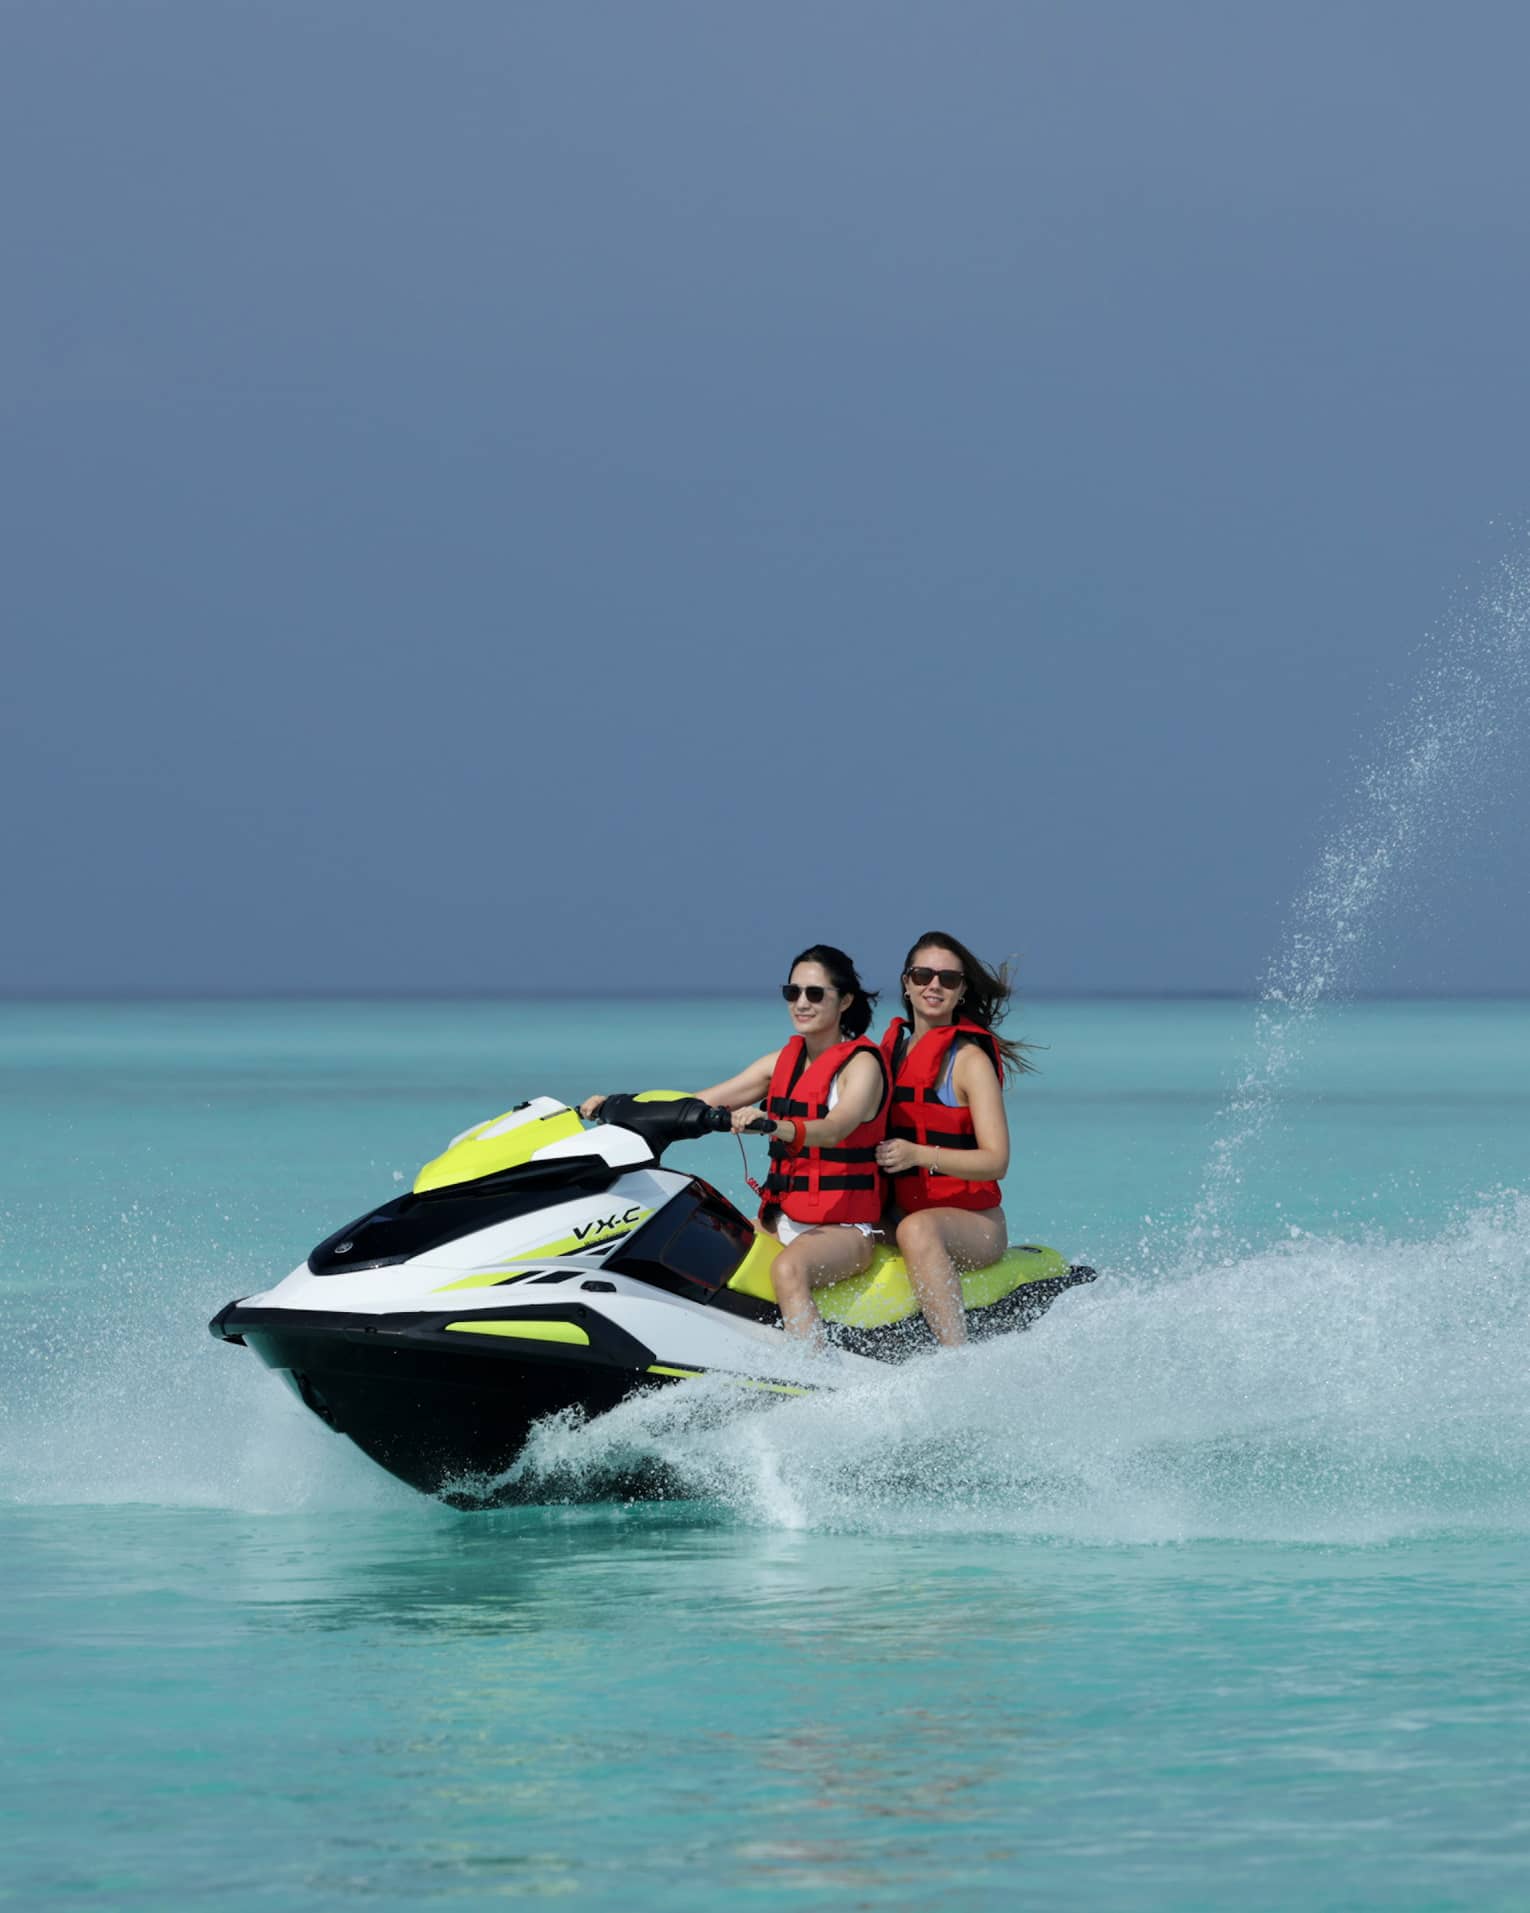 Wearing life jackets, two smiling jet-skiers ride through the clear ocean, water spurting up from beside and behind the boat.